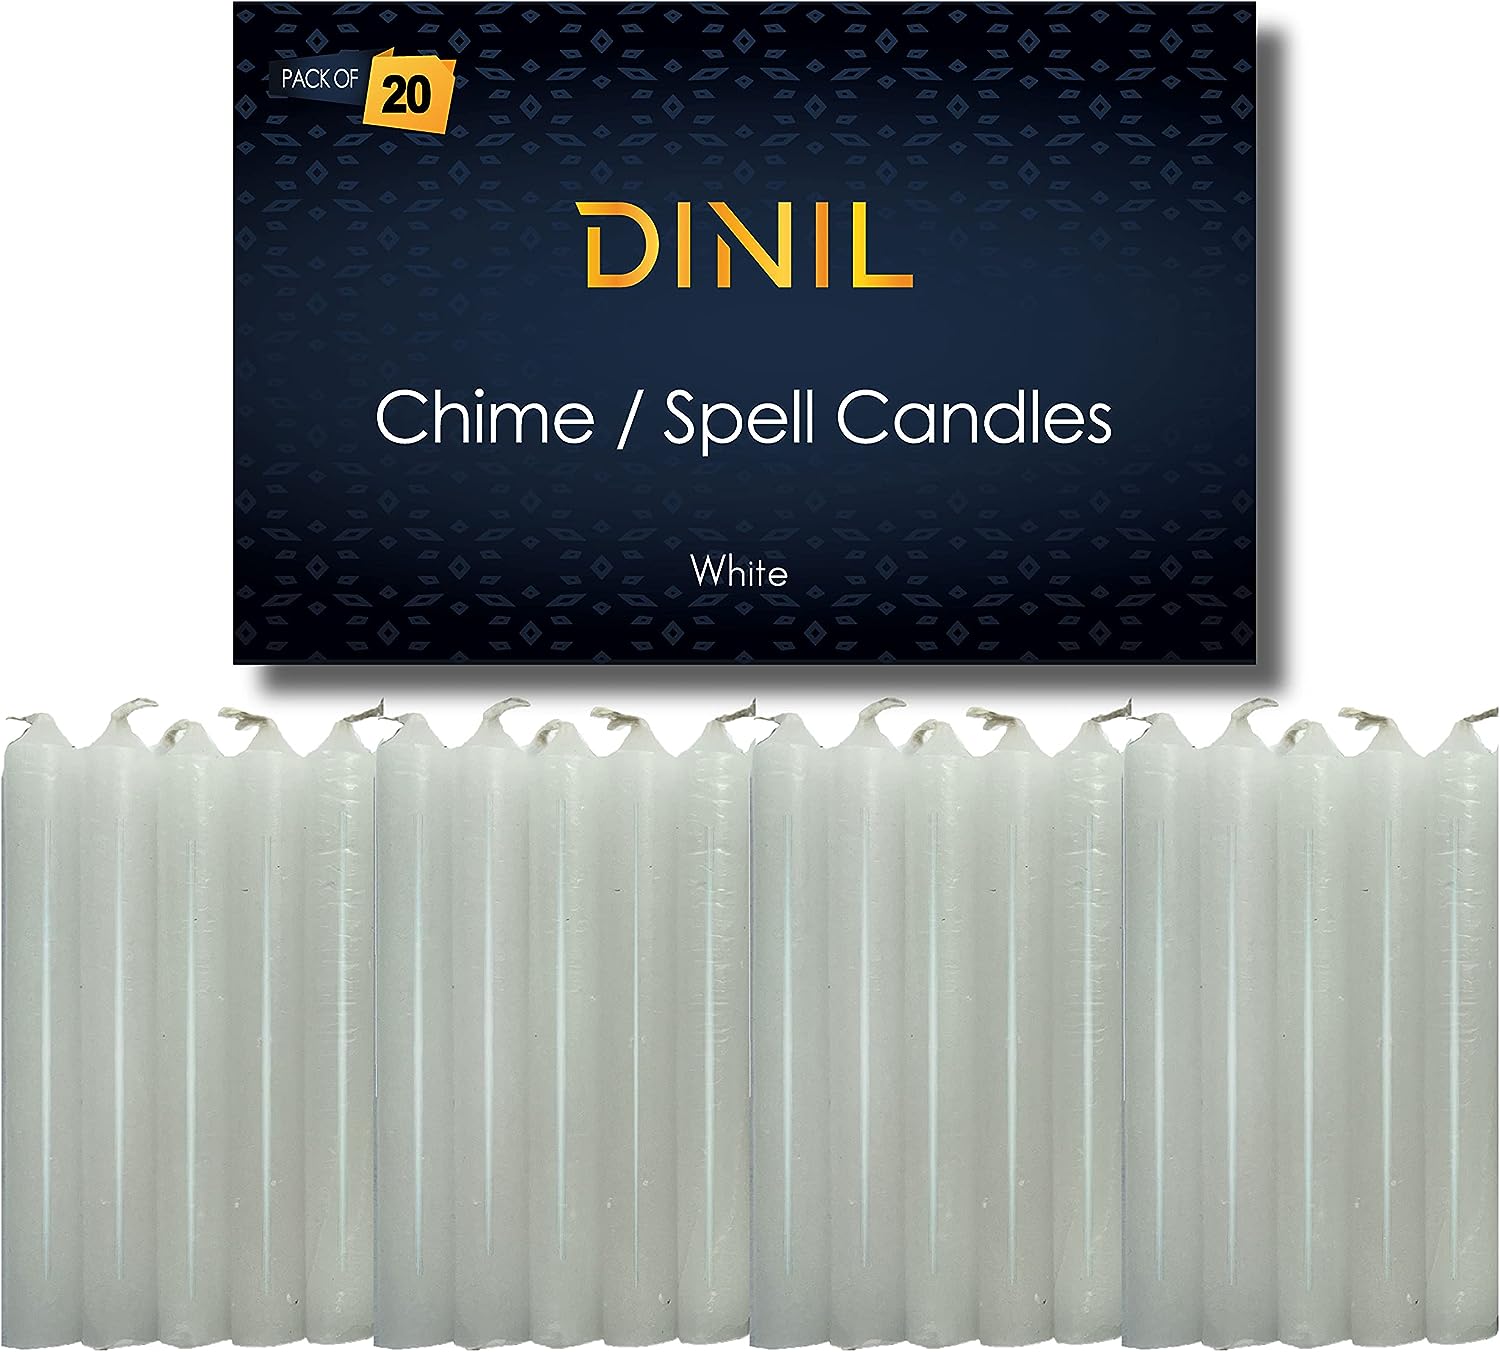 Dinil – Set of 20 White Spell & Chime Candles – [...]